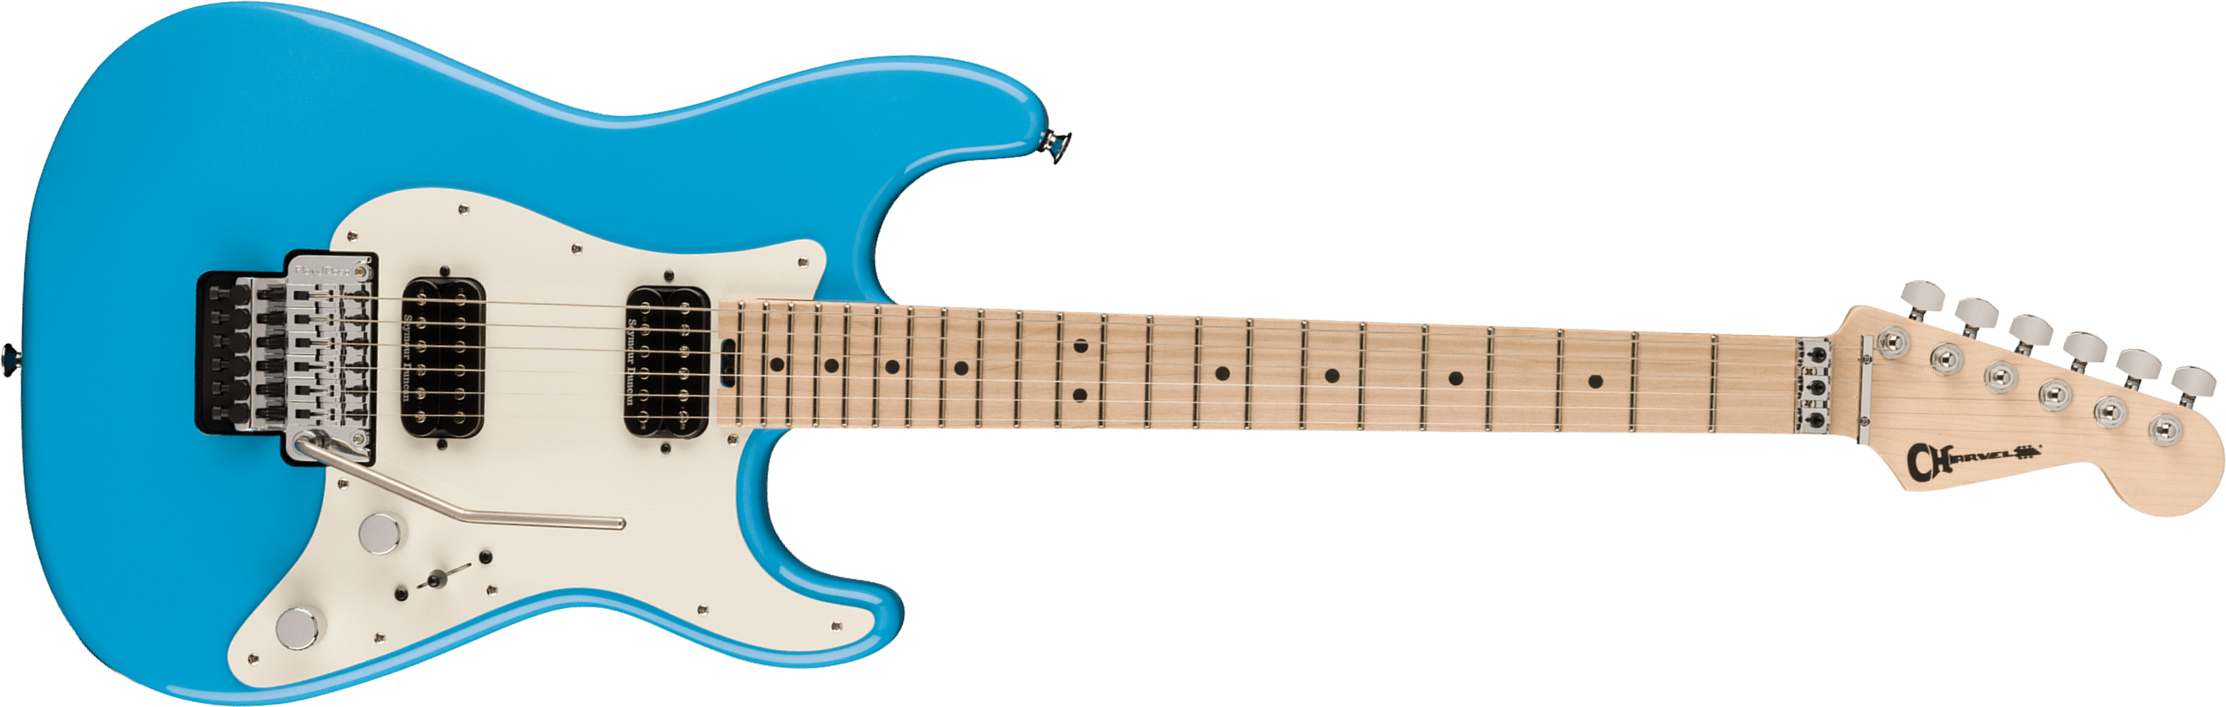 Charvel So-cal Style 1 Hh Fr M Pro-mod 2h Seymour Duncan Mn - Infinity Blue - E-Gitarre in Str-Form - Main picture